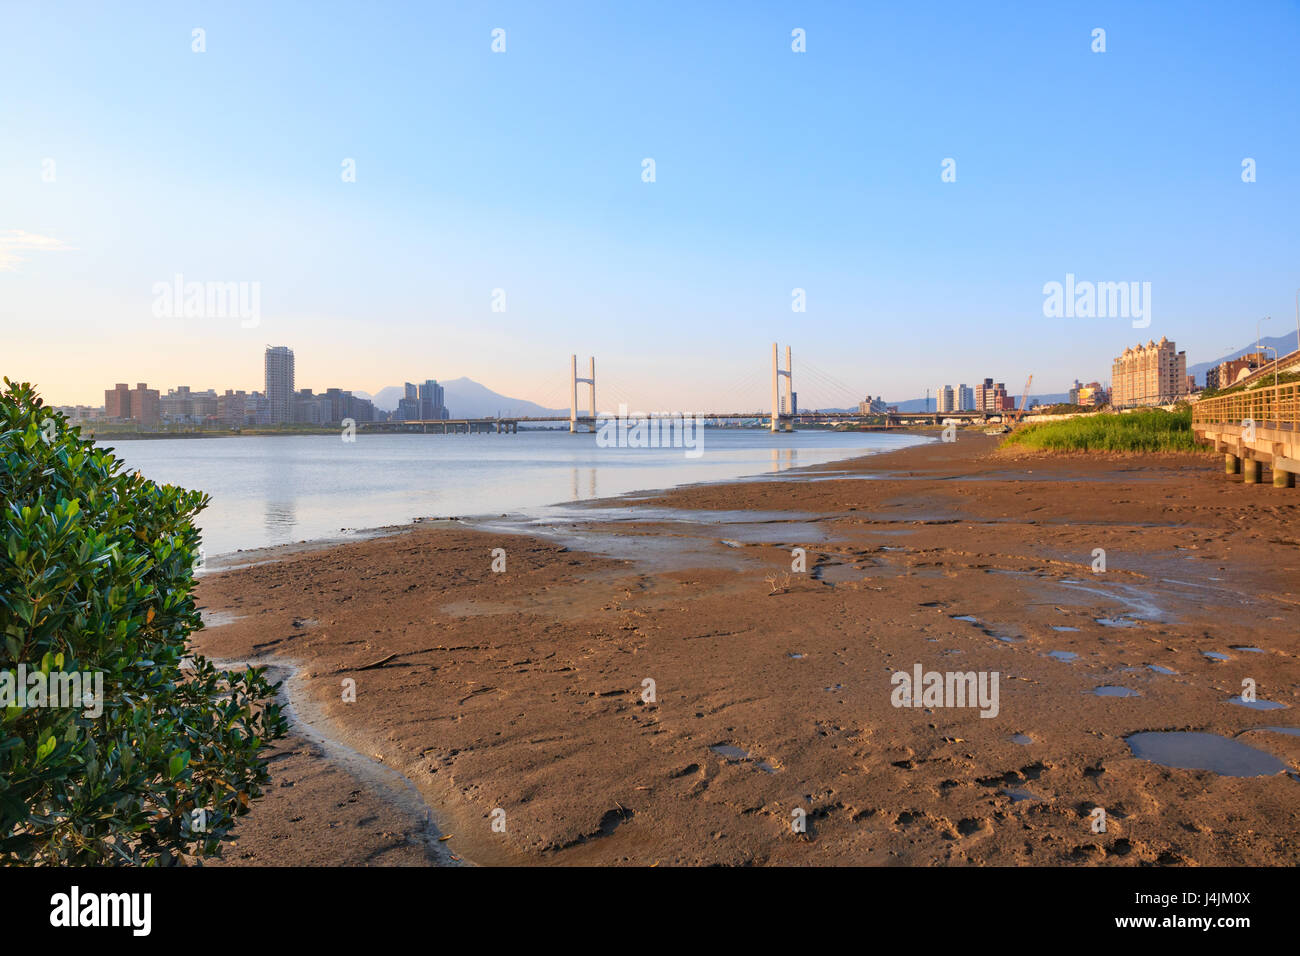 Chung Yeung Bridge (重陽大橋) over the Tamsui River in Taipei in the late afternoon sun Stock Photo